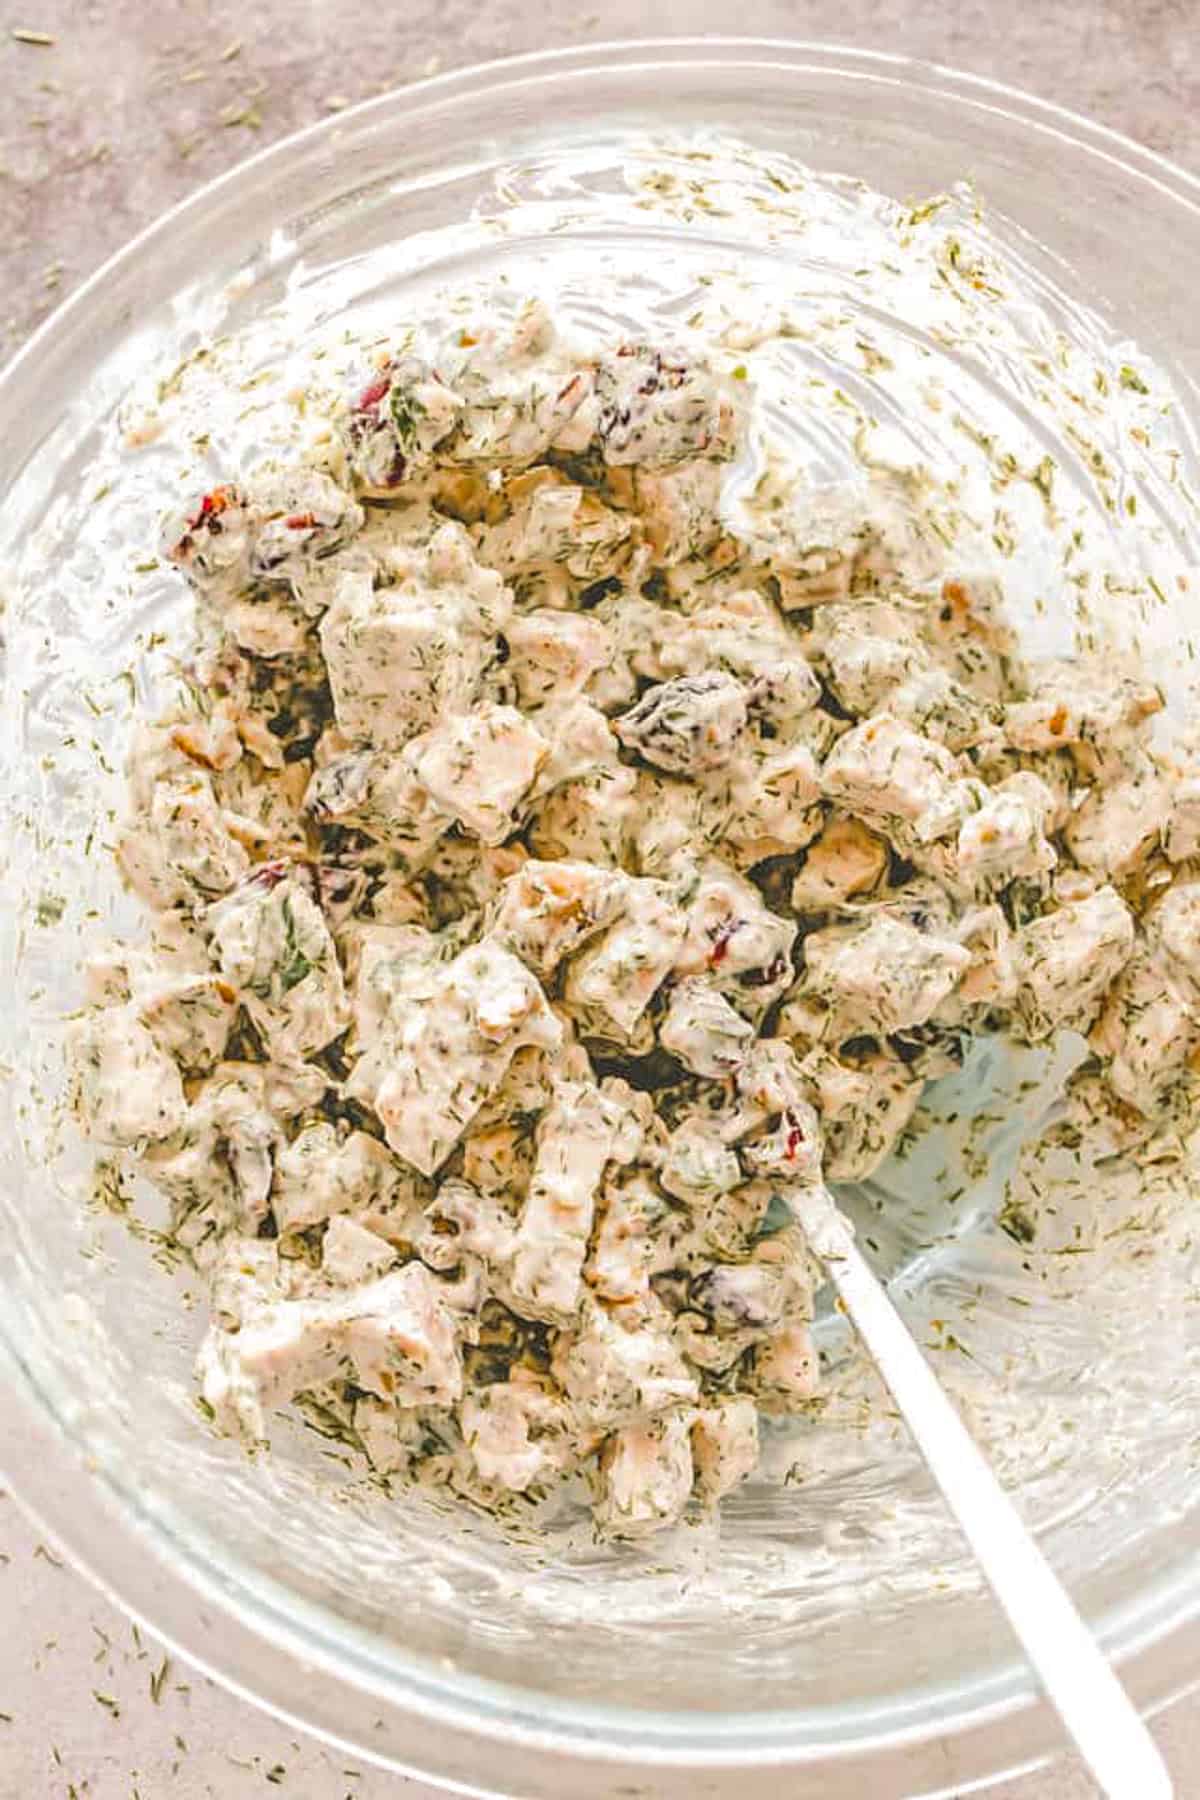 Making a Chicken Salad in a glass mixing bowl with nuts, cranberries, and creamy mayo dressing.